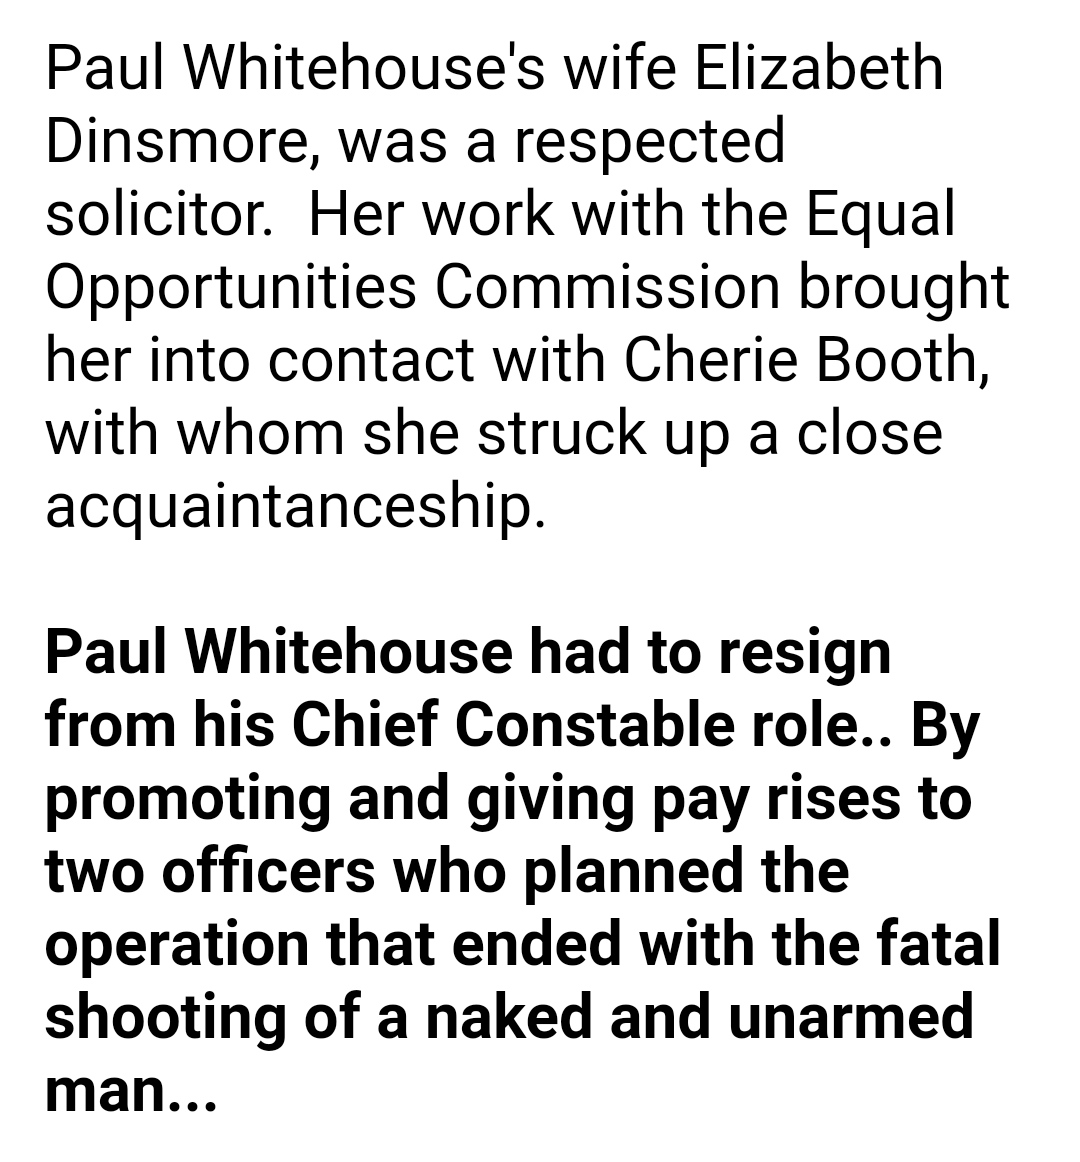 Another NACRO director: Paul Whitehouse, Chief Constable of Sussex Police involved in the Gargani case, the force that later protected Savile. He founded Starehe UK which supported Kenian schools harbouring paedo-sadists. https://www.independent.co.uk/news/in-the-shadow-of-satan-1272873.html https://www.theguardian.com/uk-news/2015/may/12/sussex-police-missed-chance-jimmy-savile-ipcc